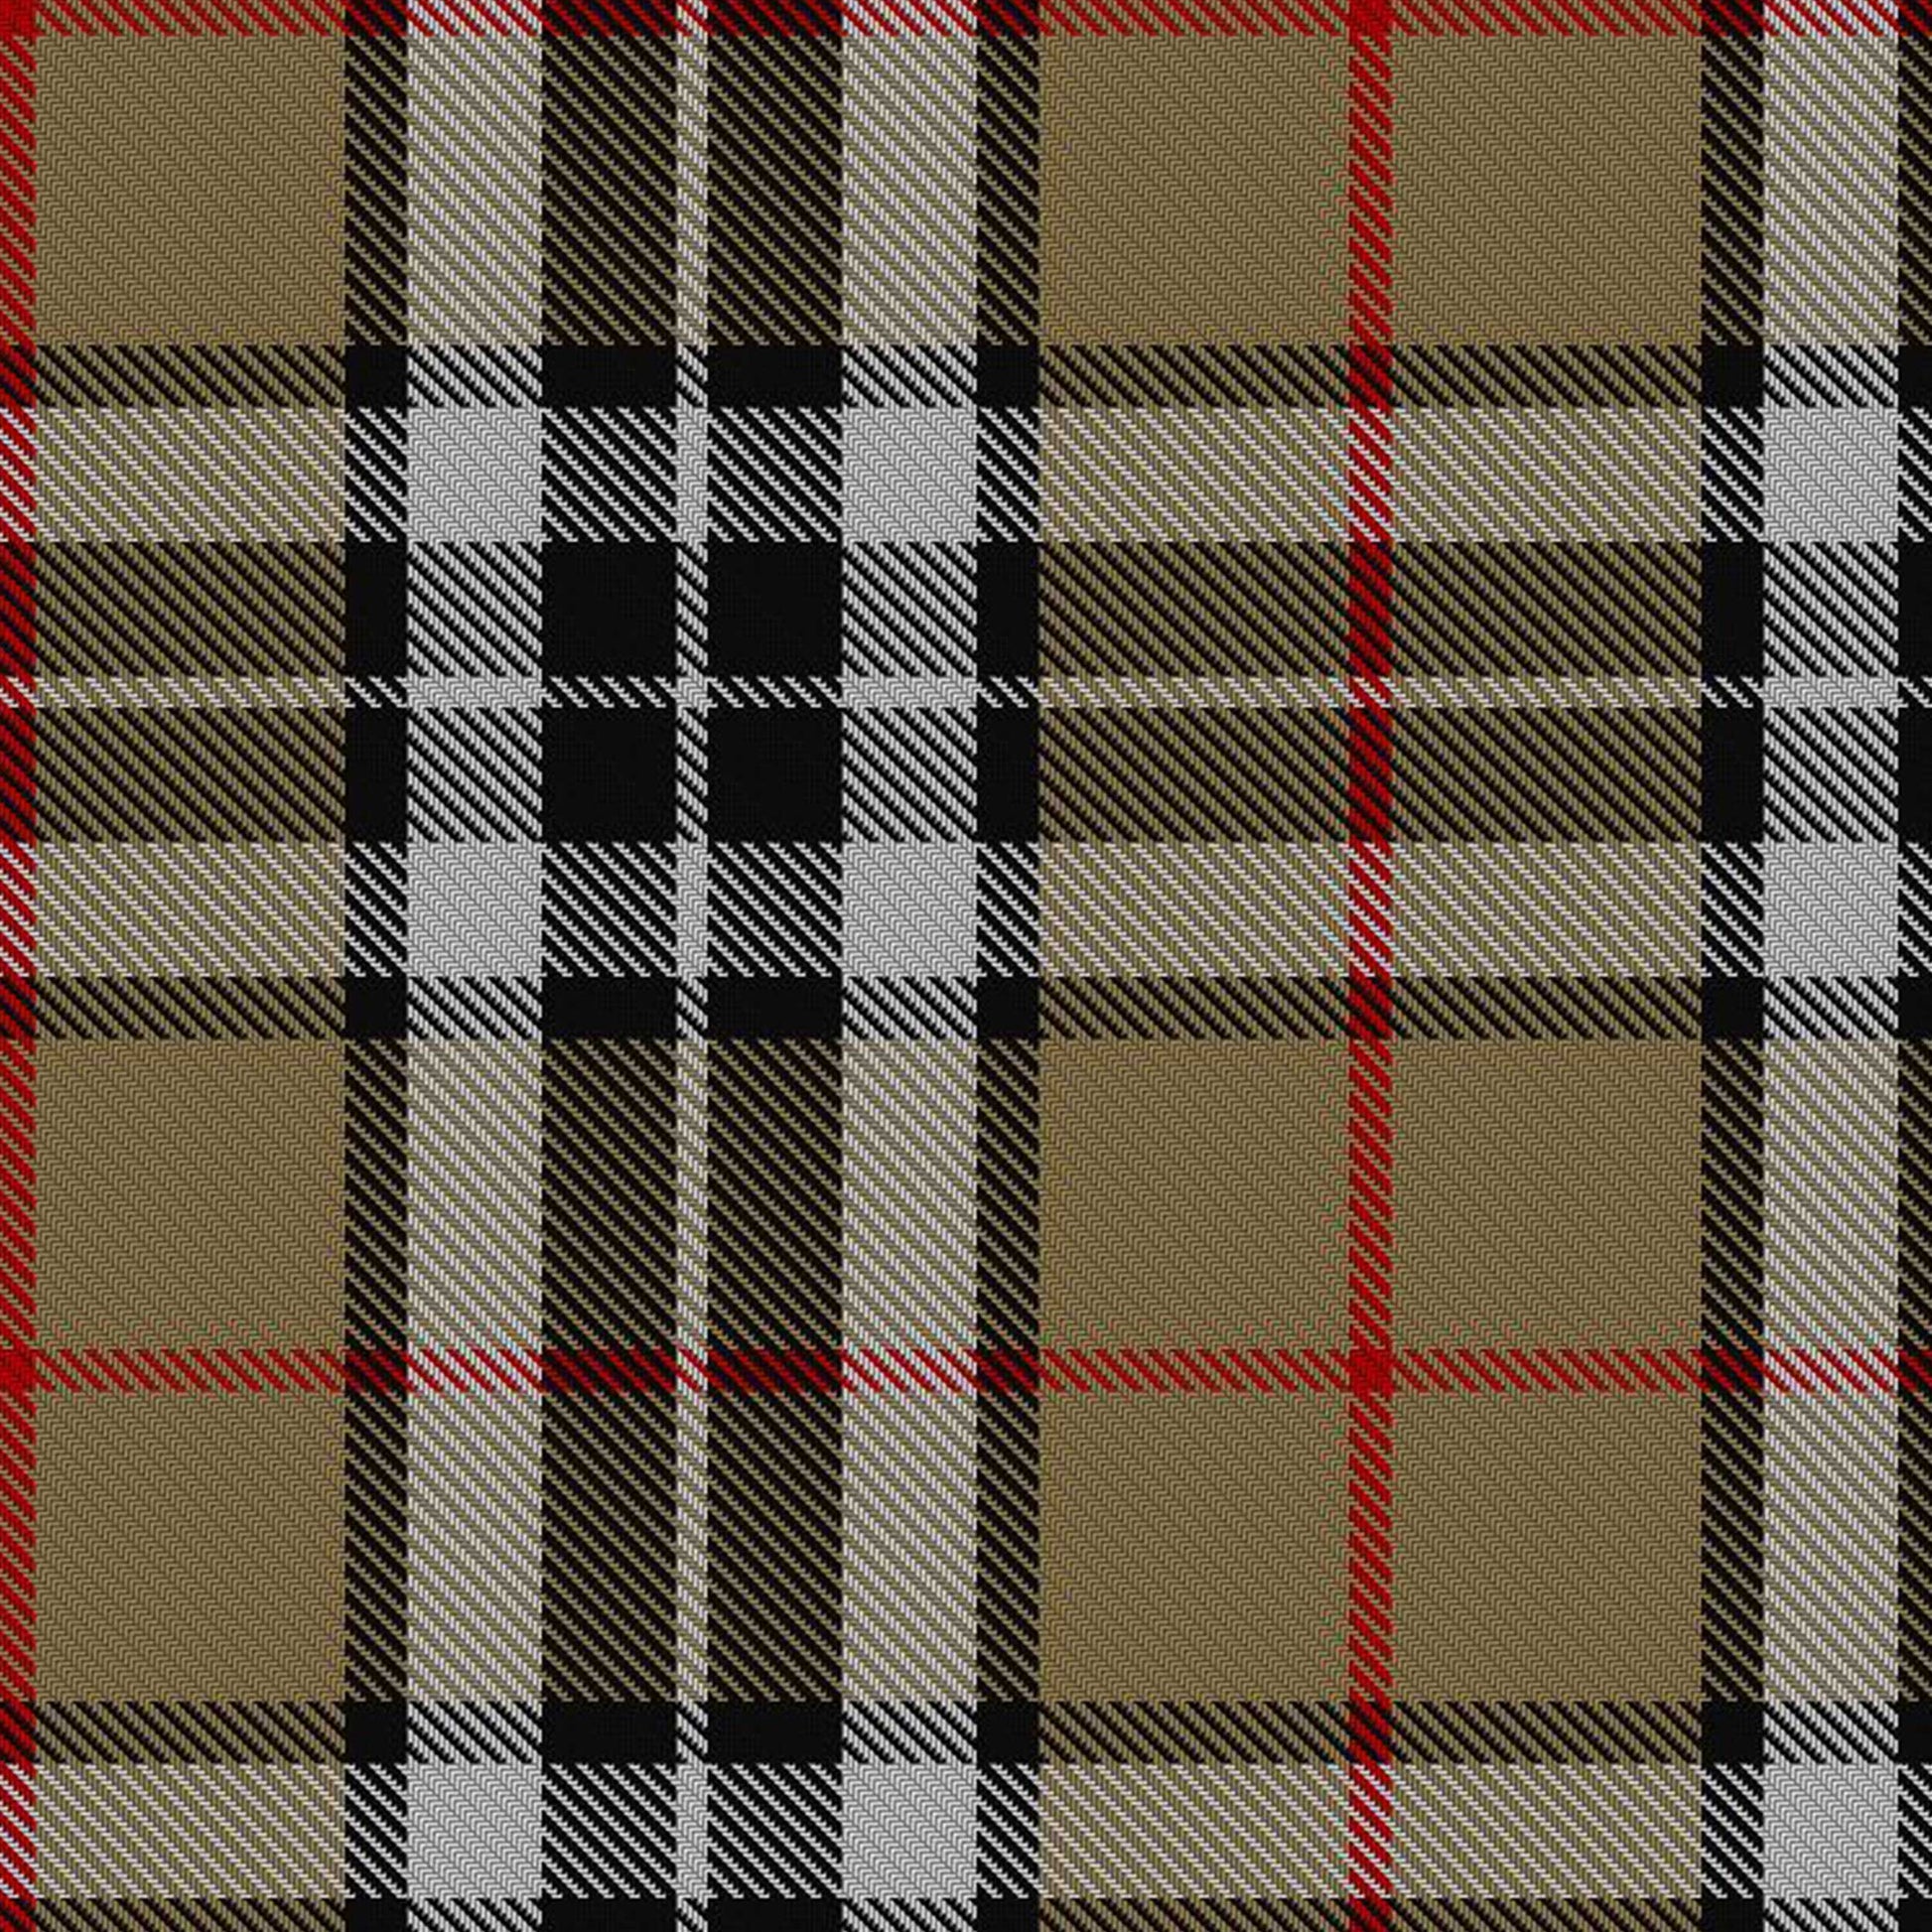 Camel Thomson Tartan Fabric and Accessories - Highland Redstone